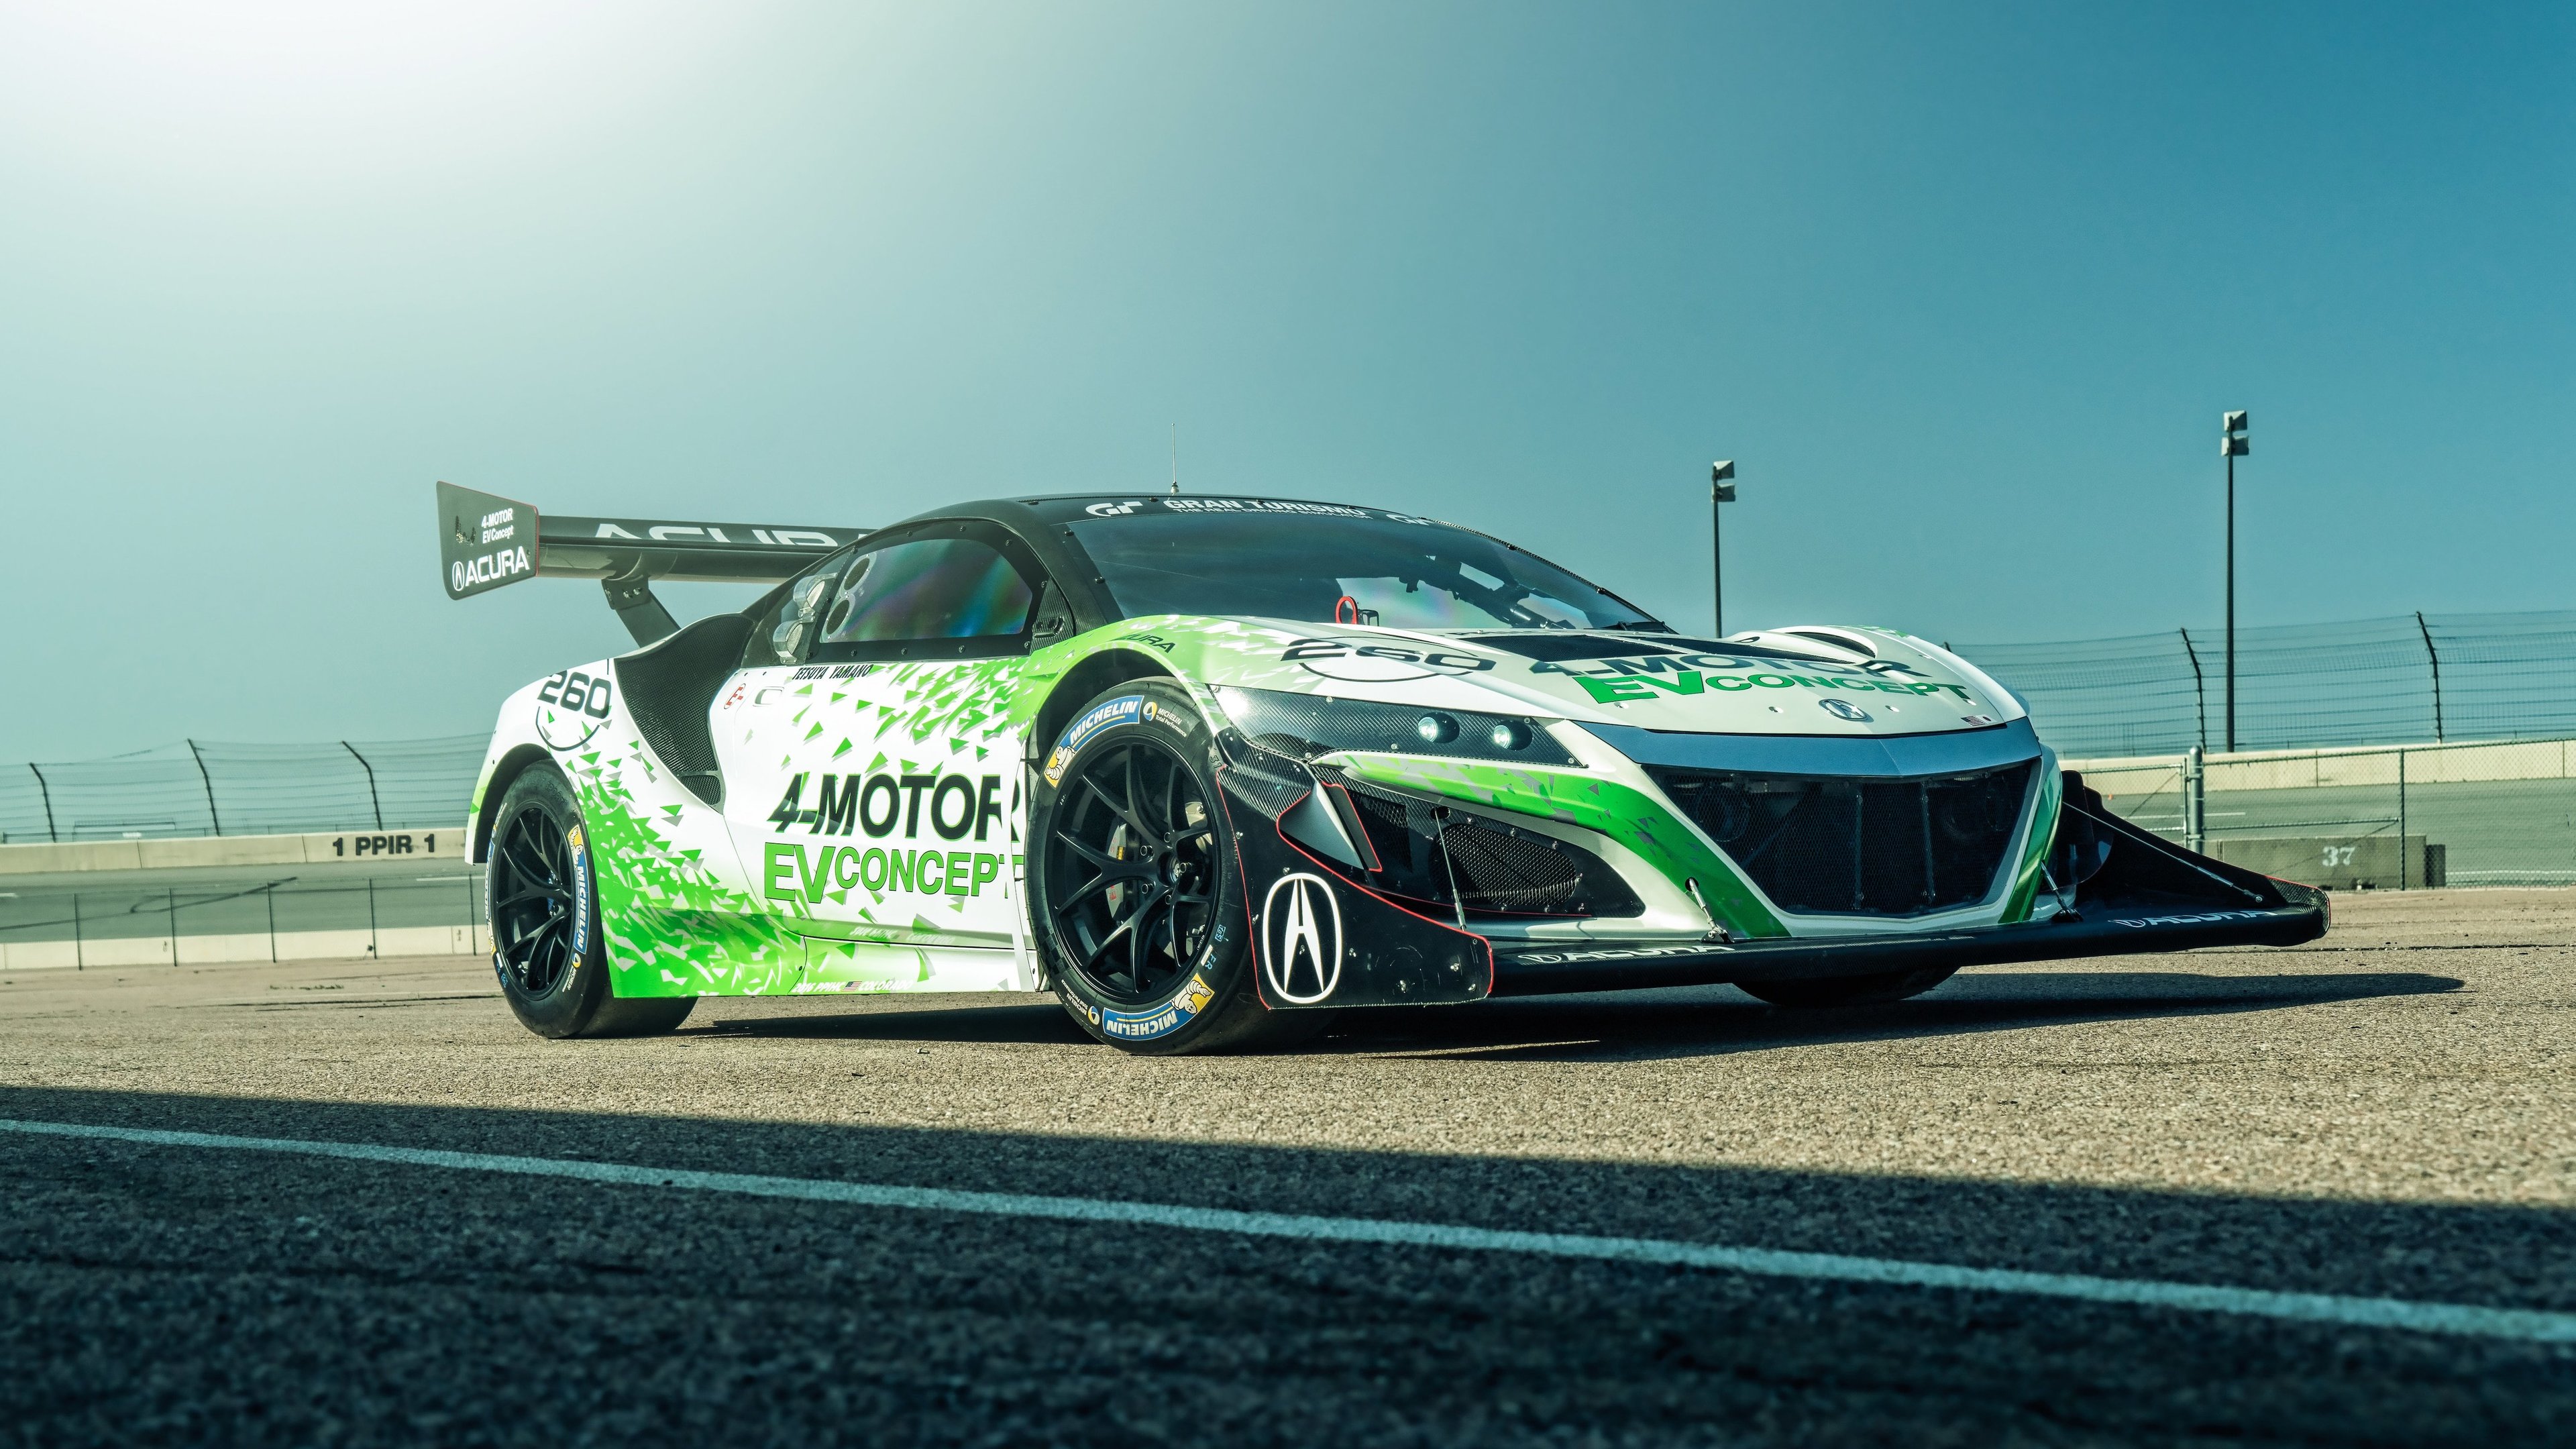 2019 acura nsx pikes peak side view 1539113641 - 2019 Acura Nsx Pikes Peak Side View - hd-wallpapers, cars wallpapers, acura nsx wallpapers, acura nsx pikes peak wallpapers, 5k wallpapers, 4k-wallpapers, 2019 cars wallpapers